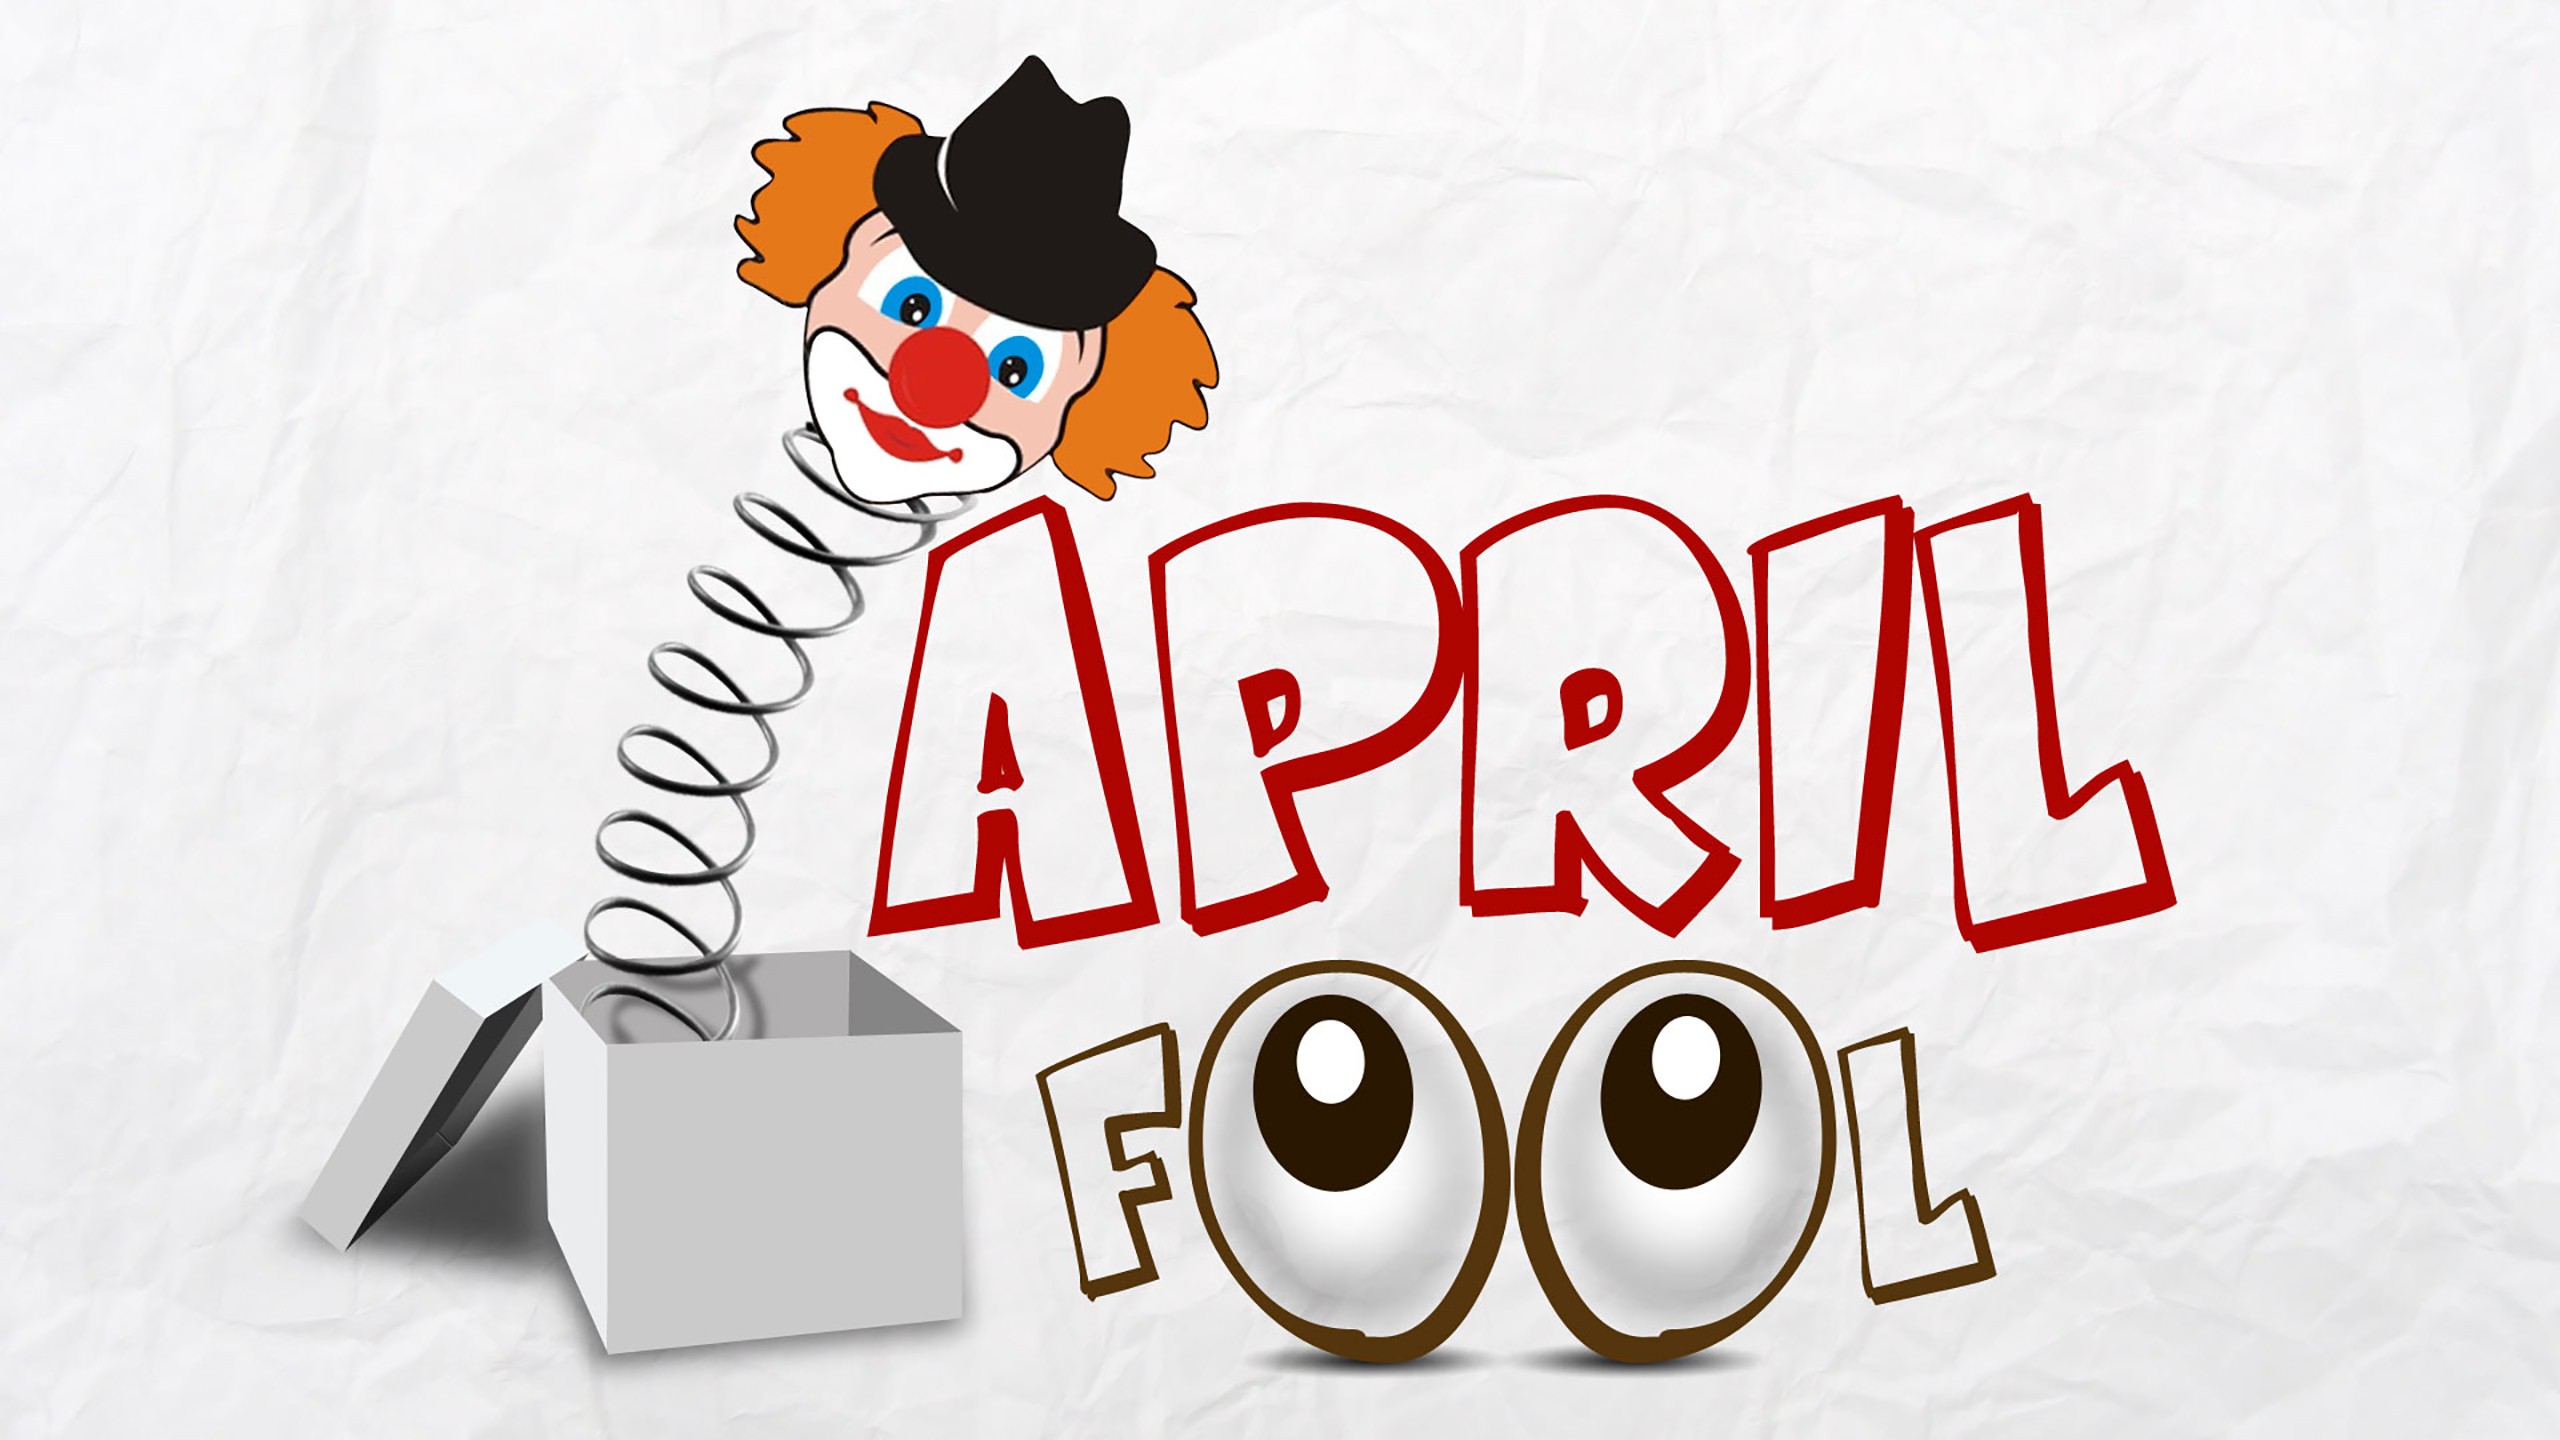 April Fool Desktop Free Awesome Image For Mobile